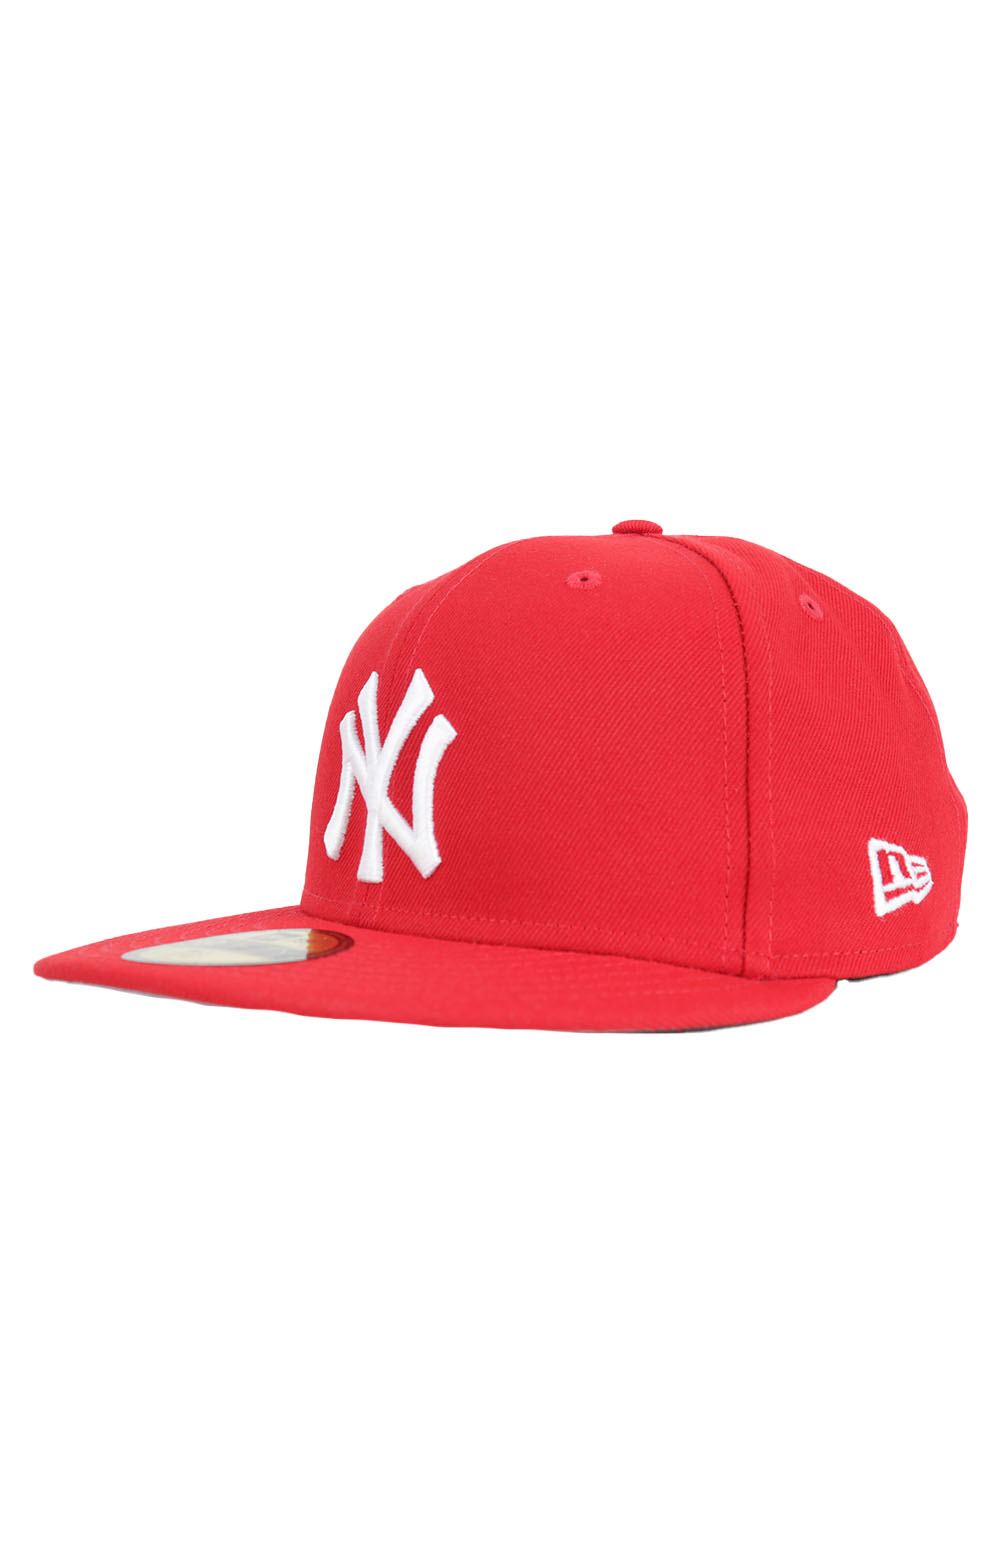 NY Yankees 99 World Series Patch Up 59FIFTY Fitted Hat - Red/White